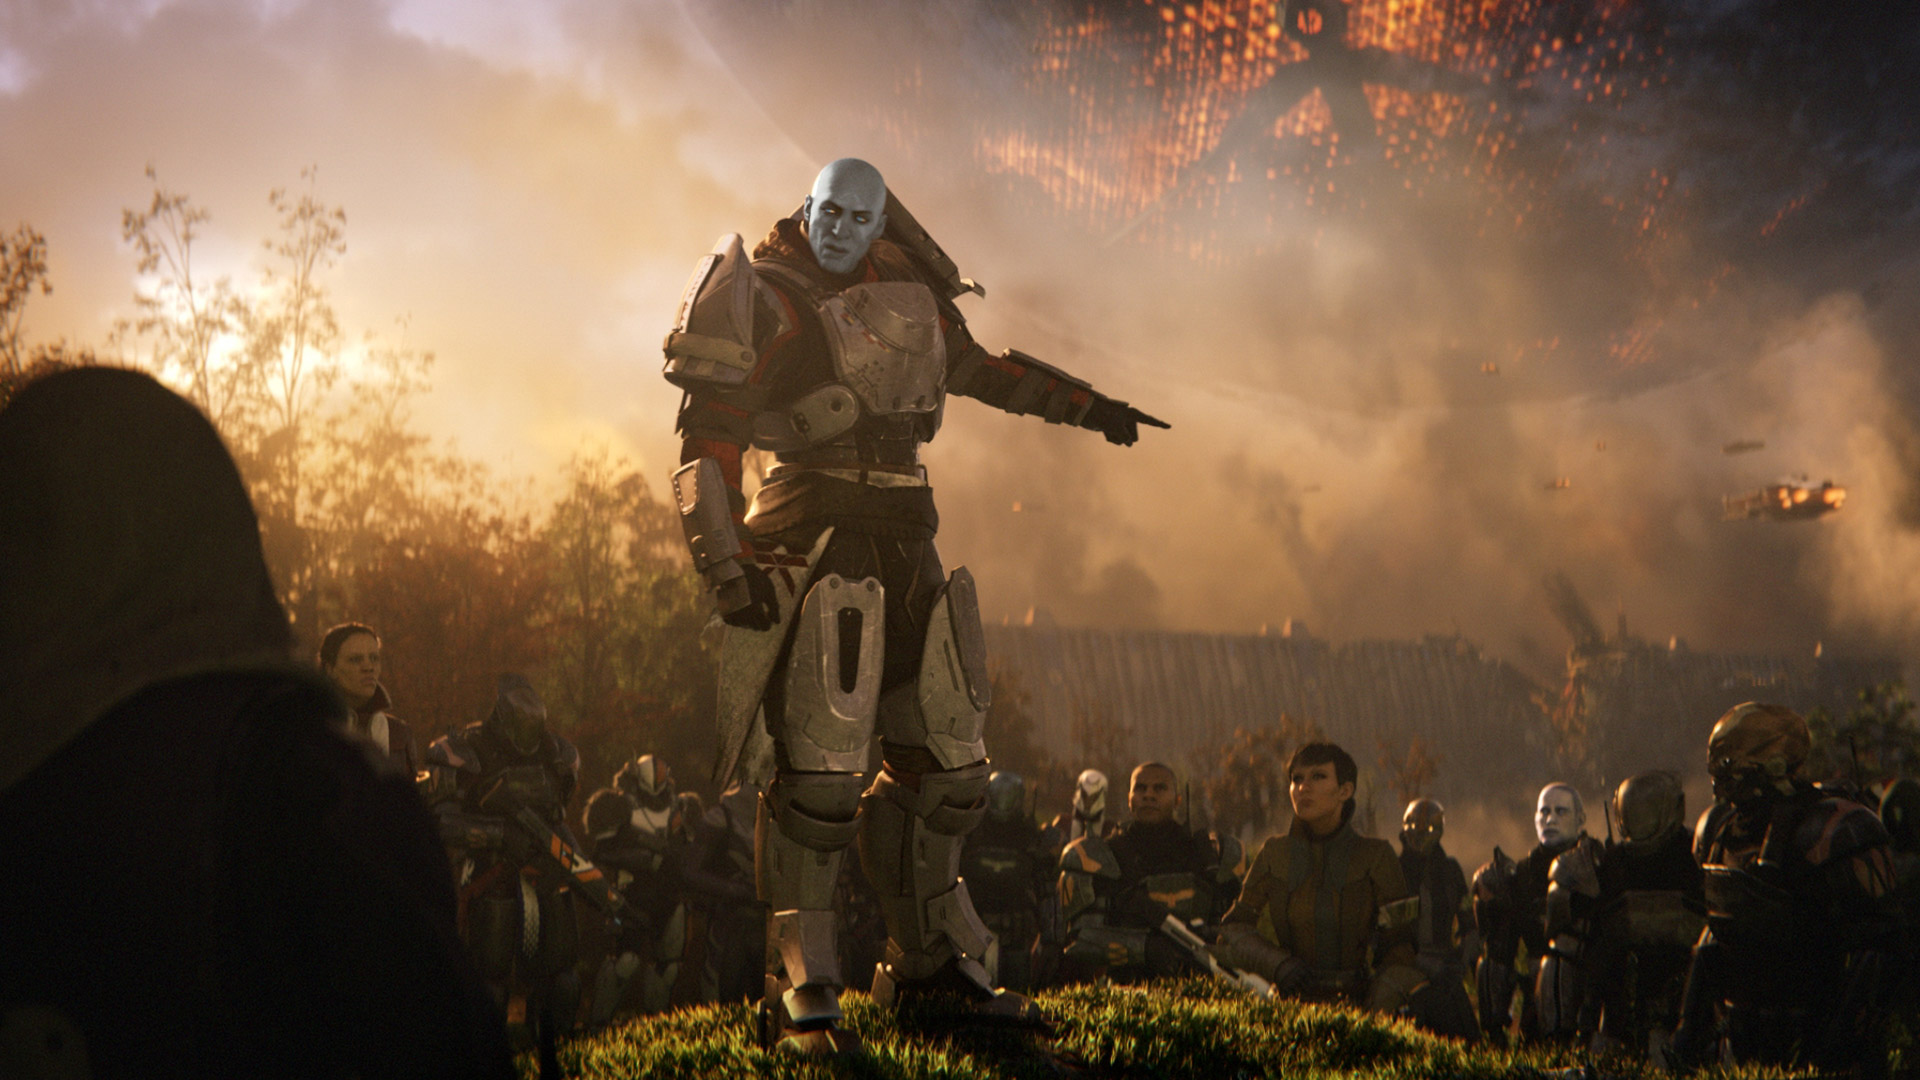 Destiny Prequel Series Would be Awesome